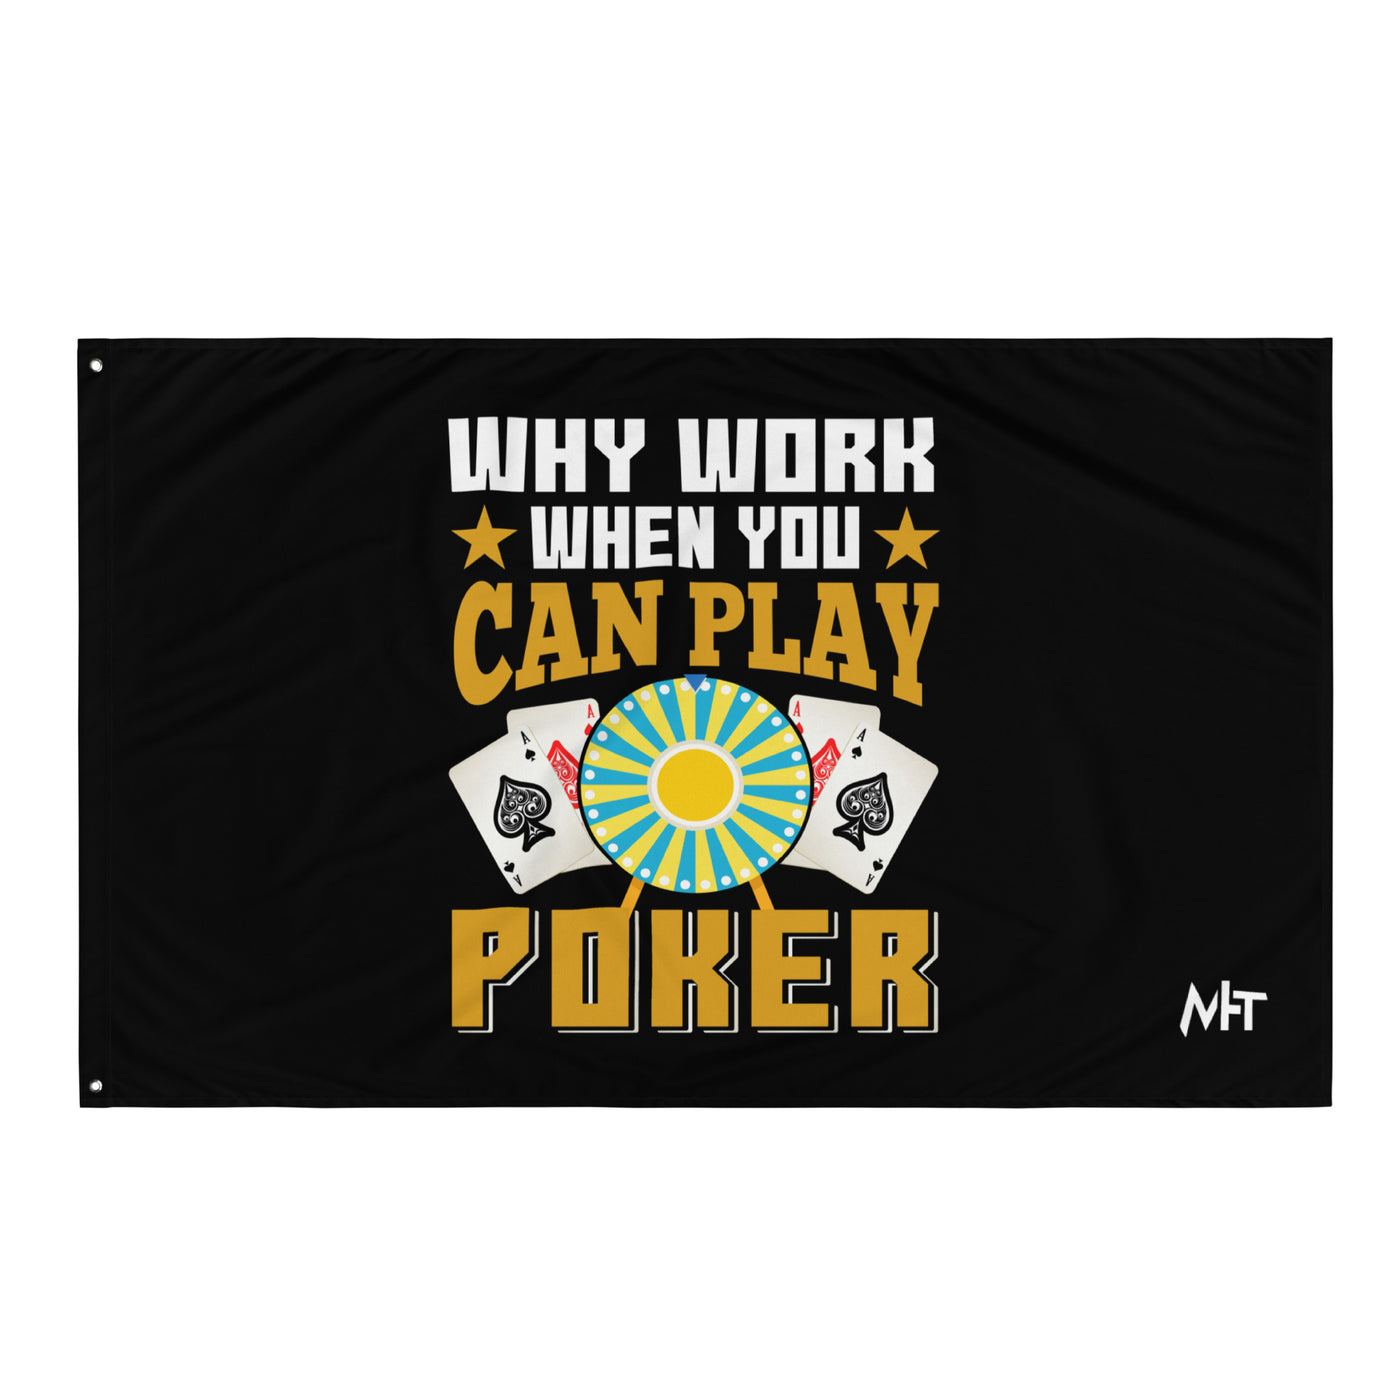 Why Work when you can Play Poker - Flag